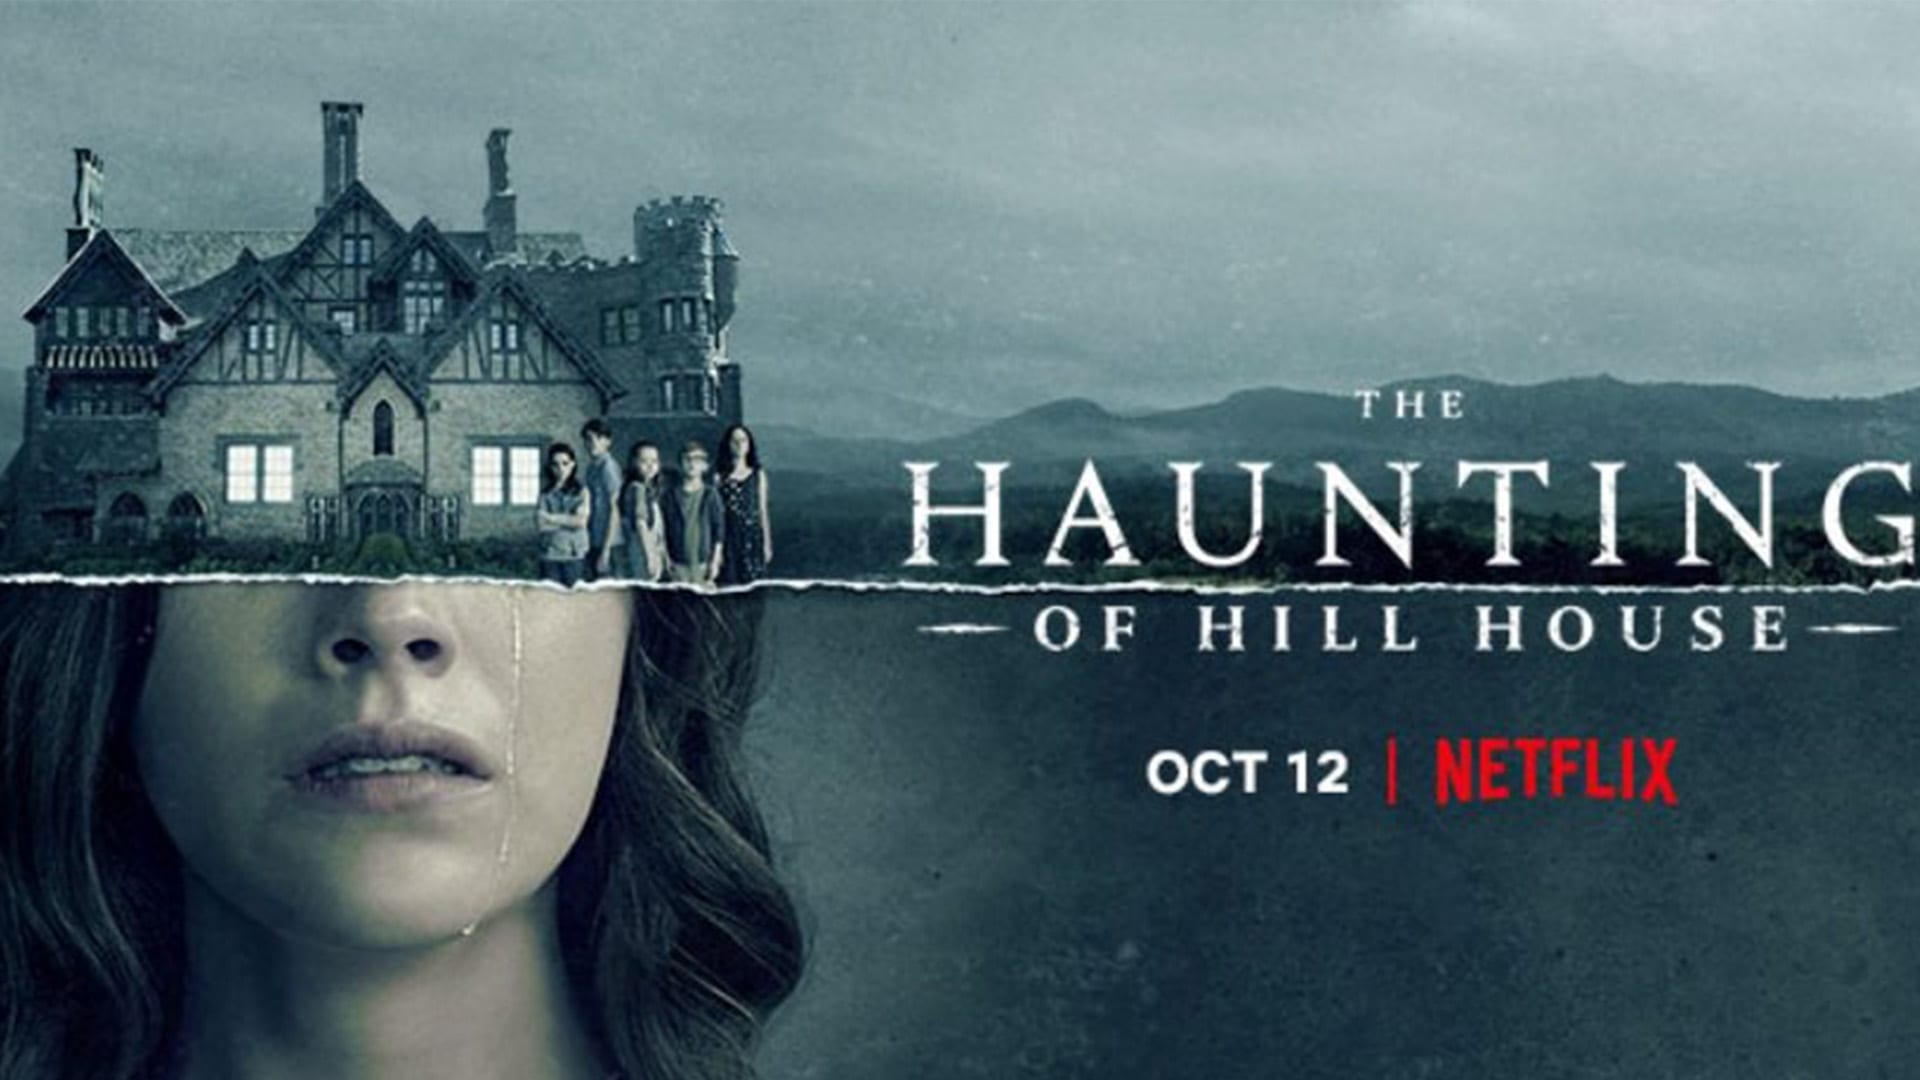 the haunting of hill house online book